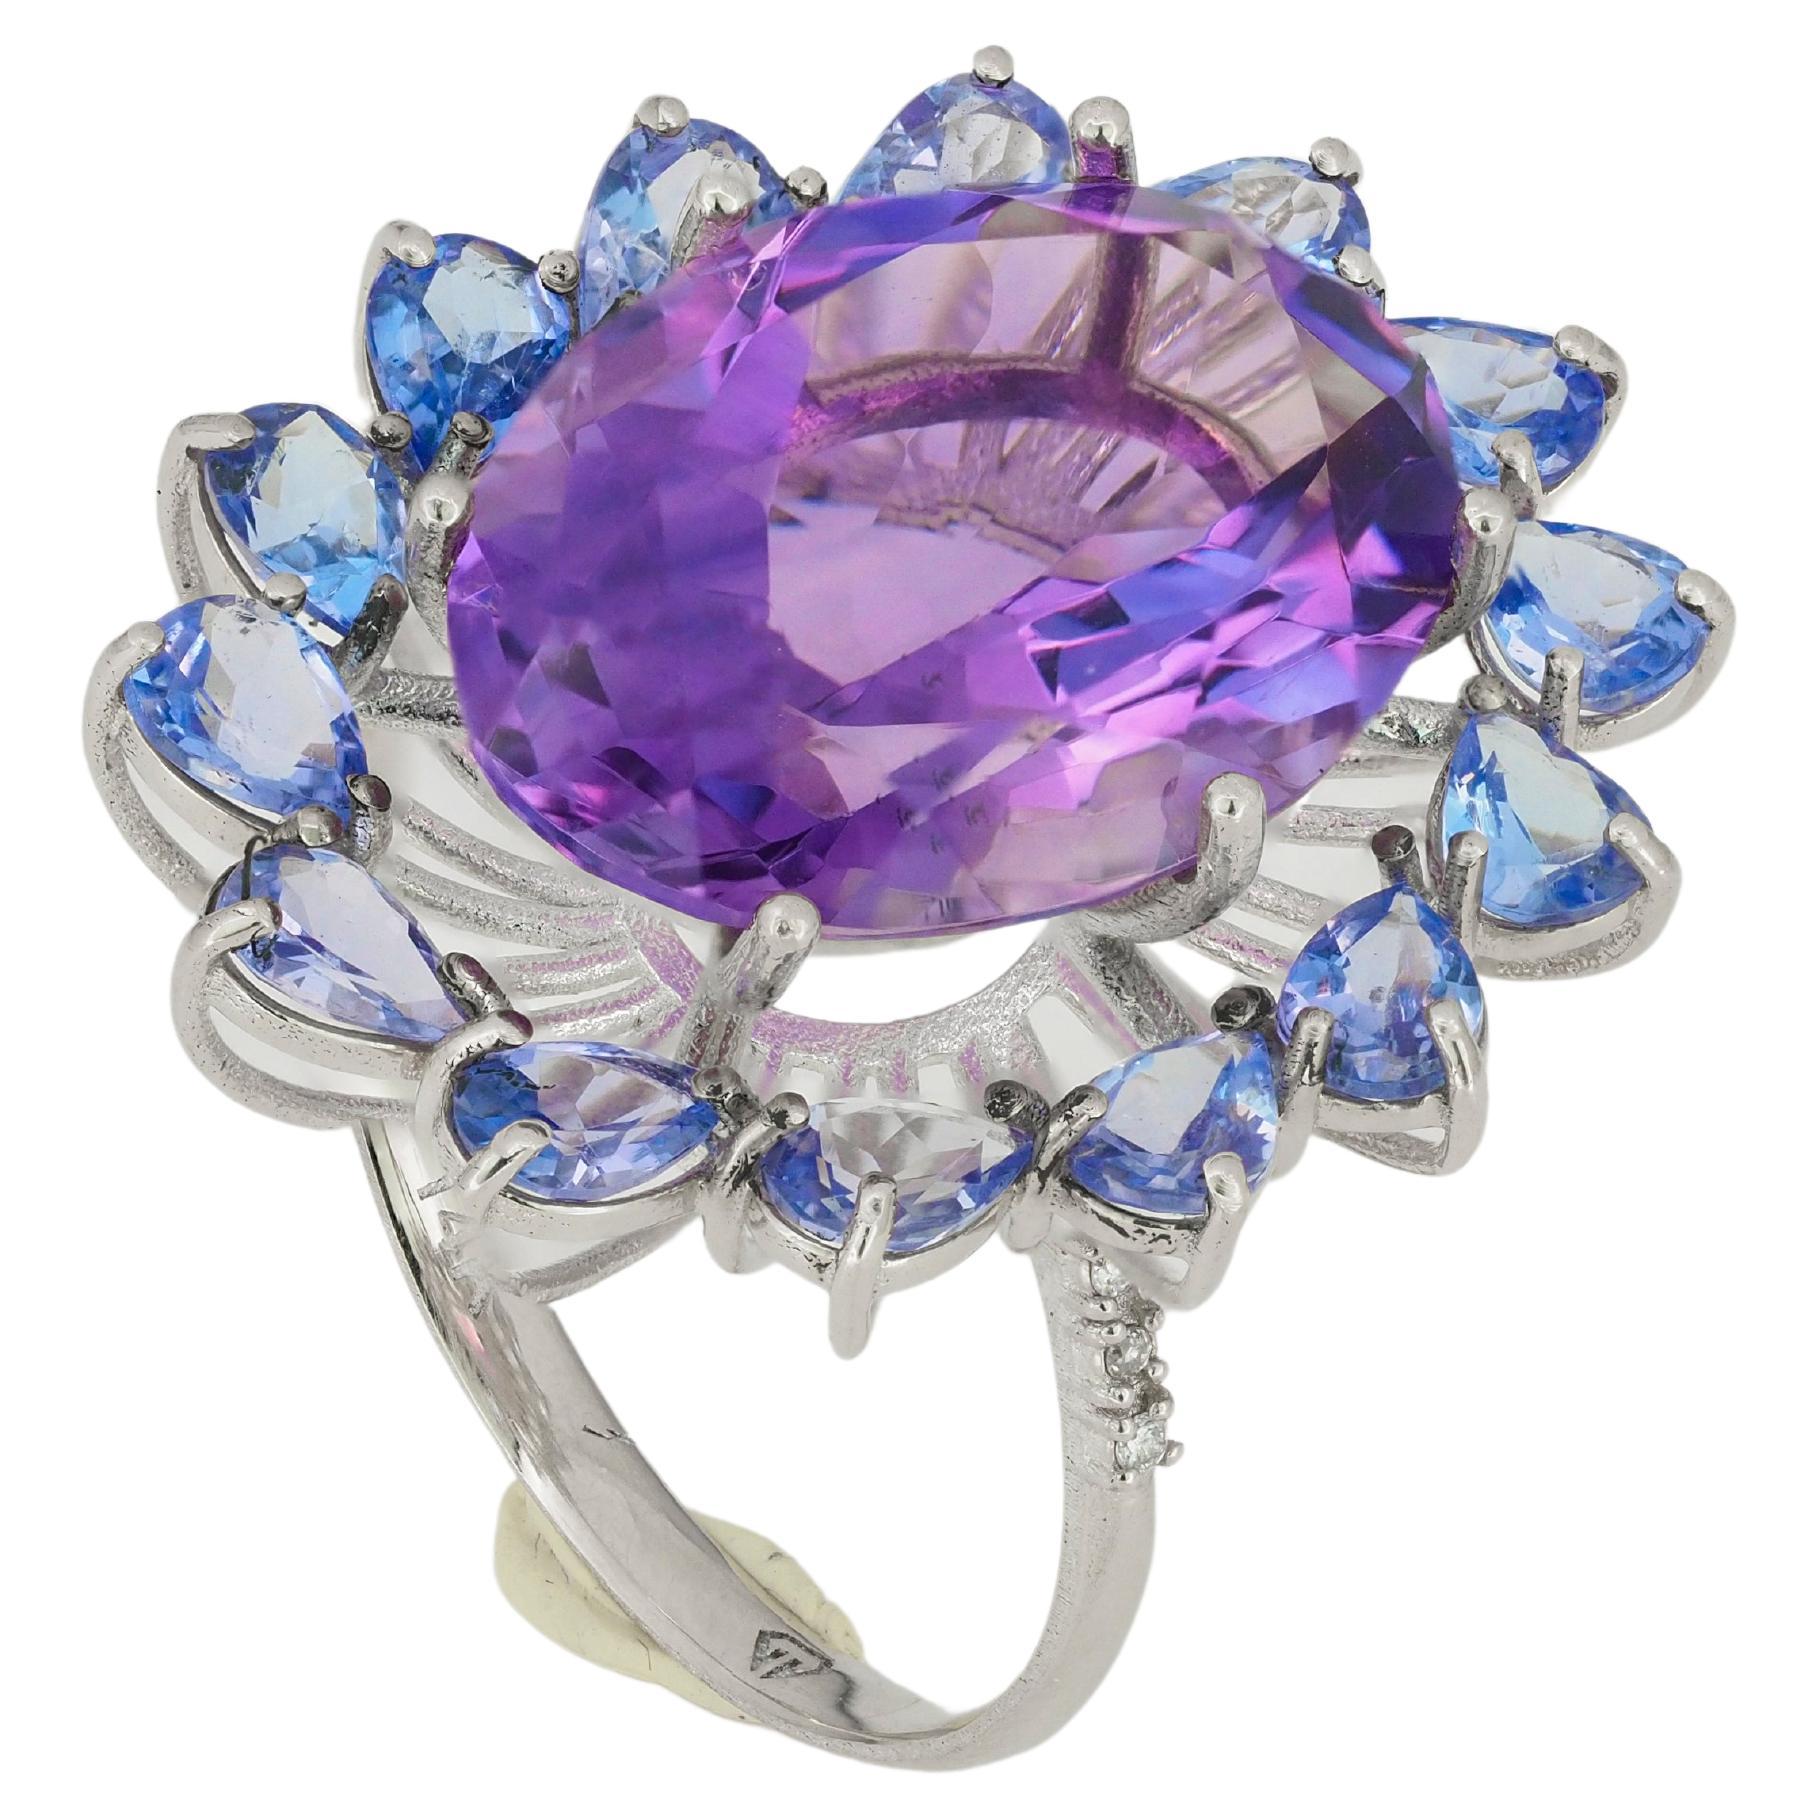 Modern 14k Gold Cocktail Ring with Amethyst, Tanzanites and Diamonds